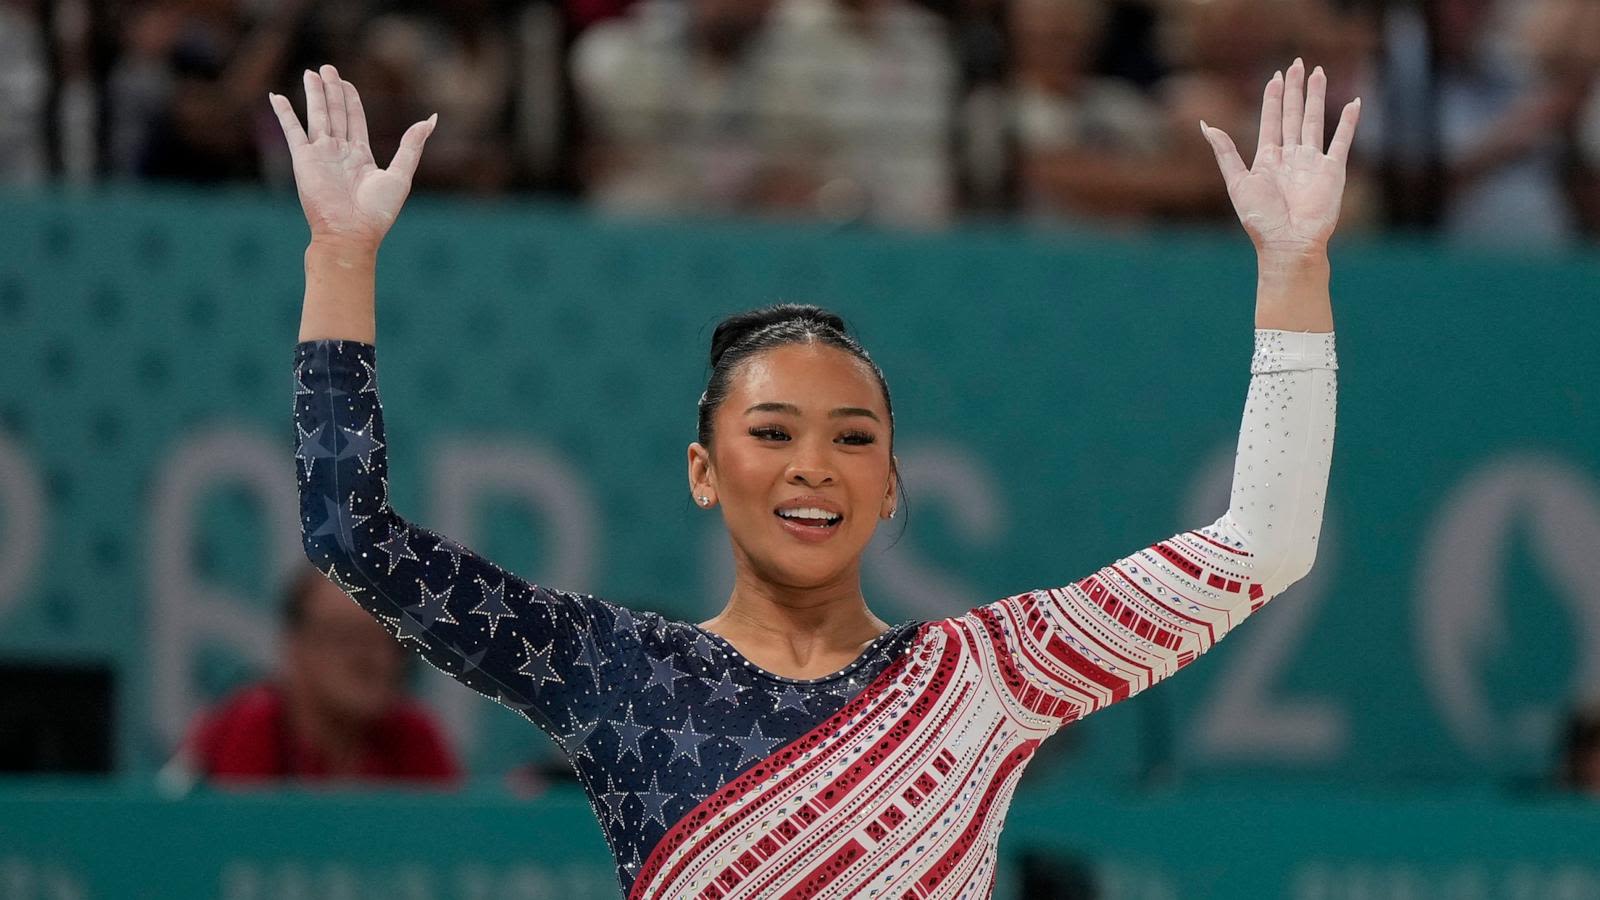 What to know about Olympian Suni Lee's family